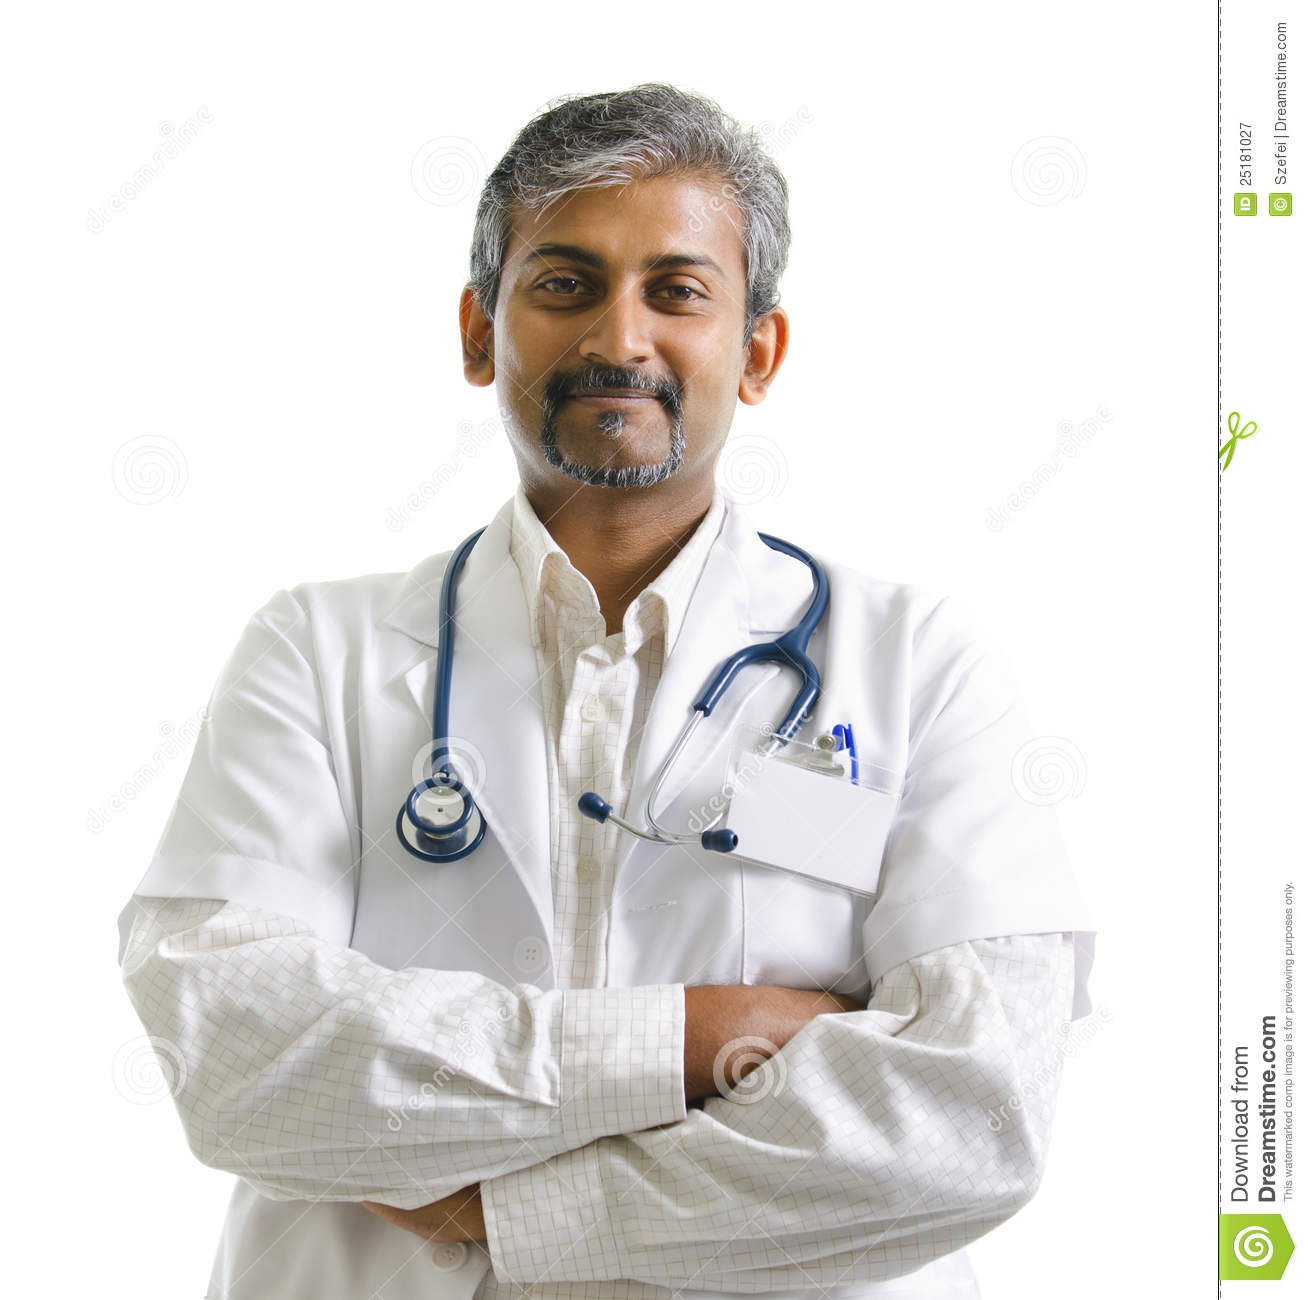 Male Doctor Stock Photos, Images, & Pictures.